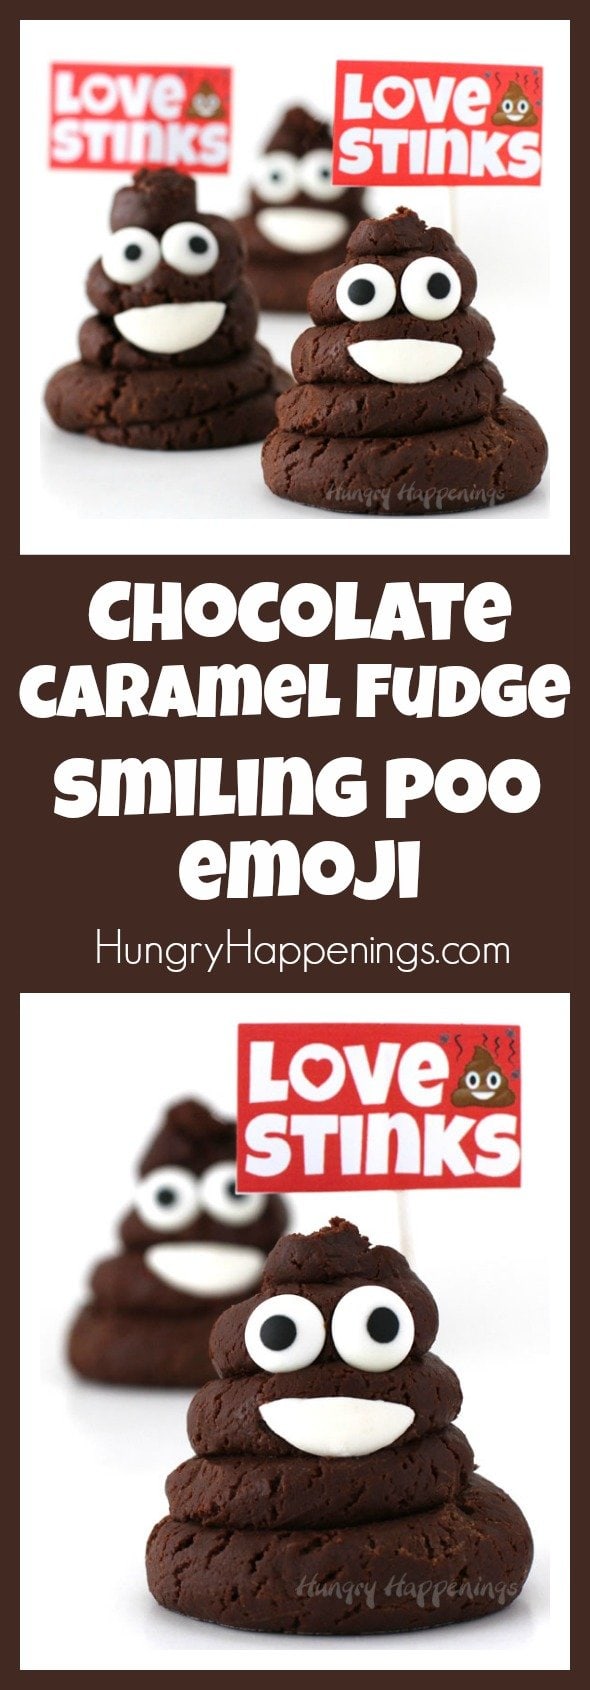 Poke some fun at Valentine's Day by passing out Chocolate Caramel Fudge Smiling Poo Emoji to your friends who believe that love stinks. Watch the video tutorial to see how easy it is to turn a 2-ingredient recipe into one of the most popular emoji on the planet.